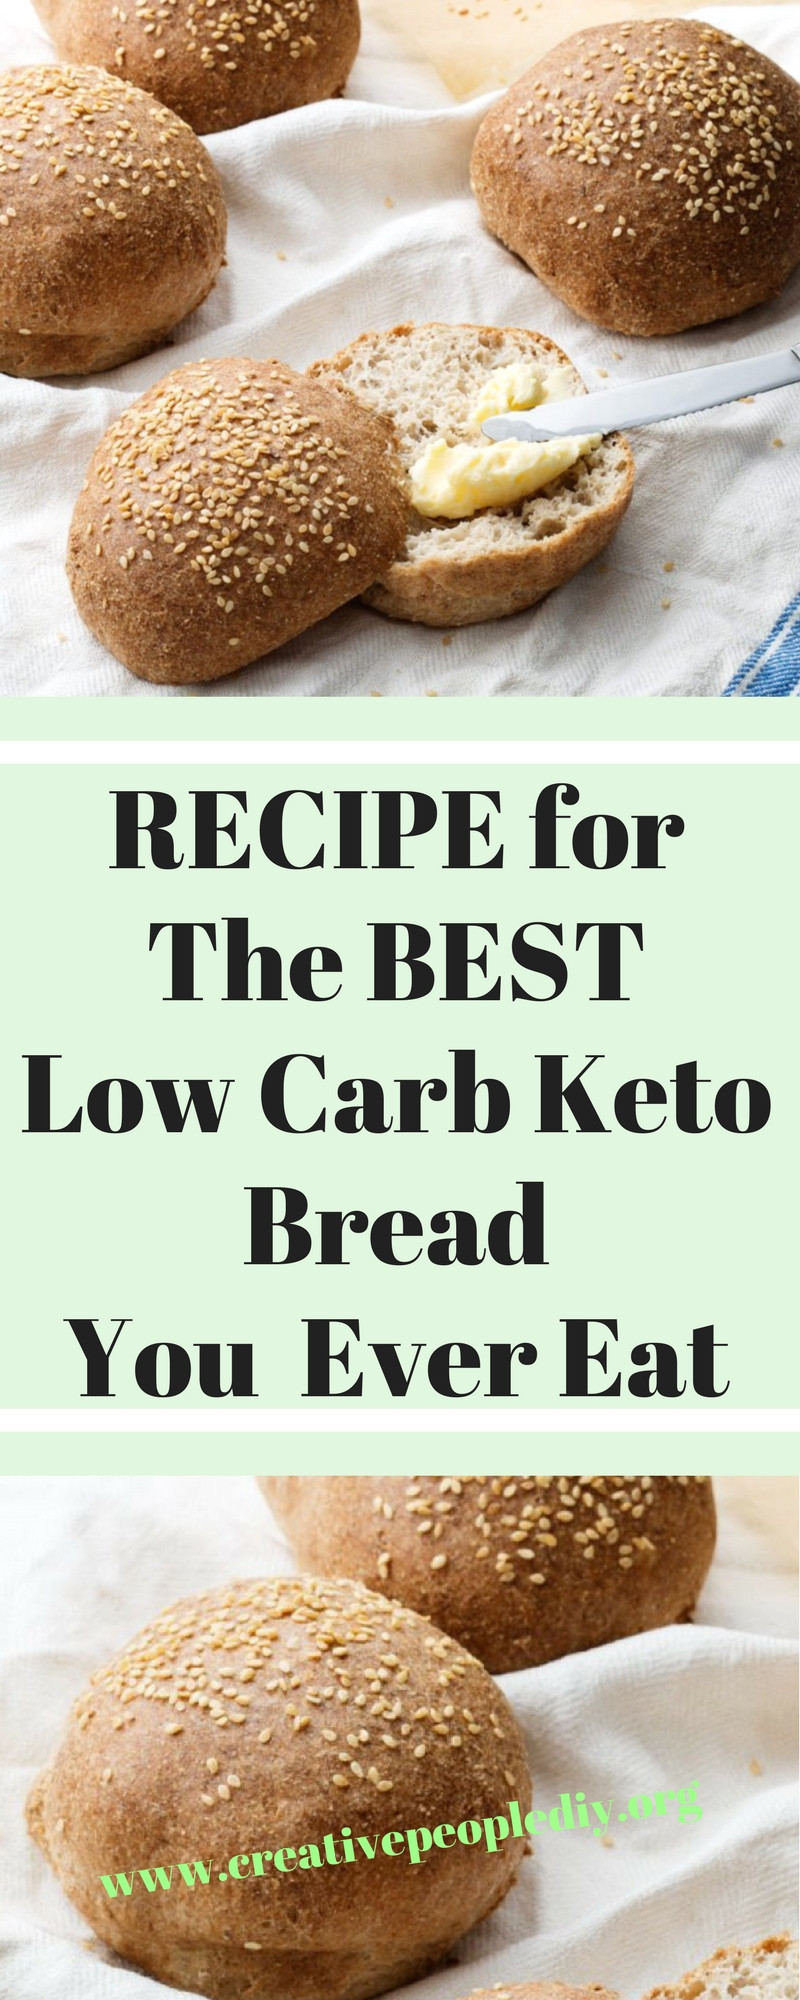 Healthy Low Carb Bread
 RECIPE for The BEST Low Carb Keto Bread You Will Ever Eat